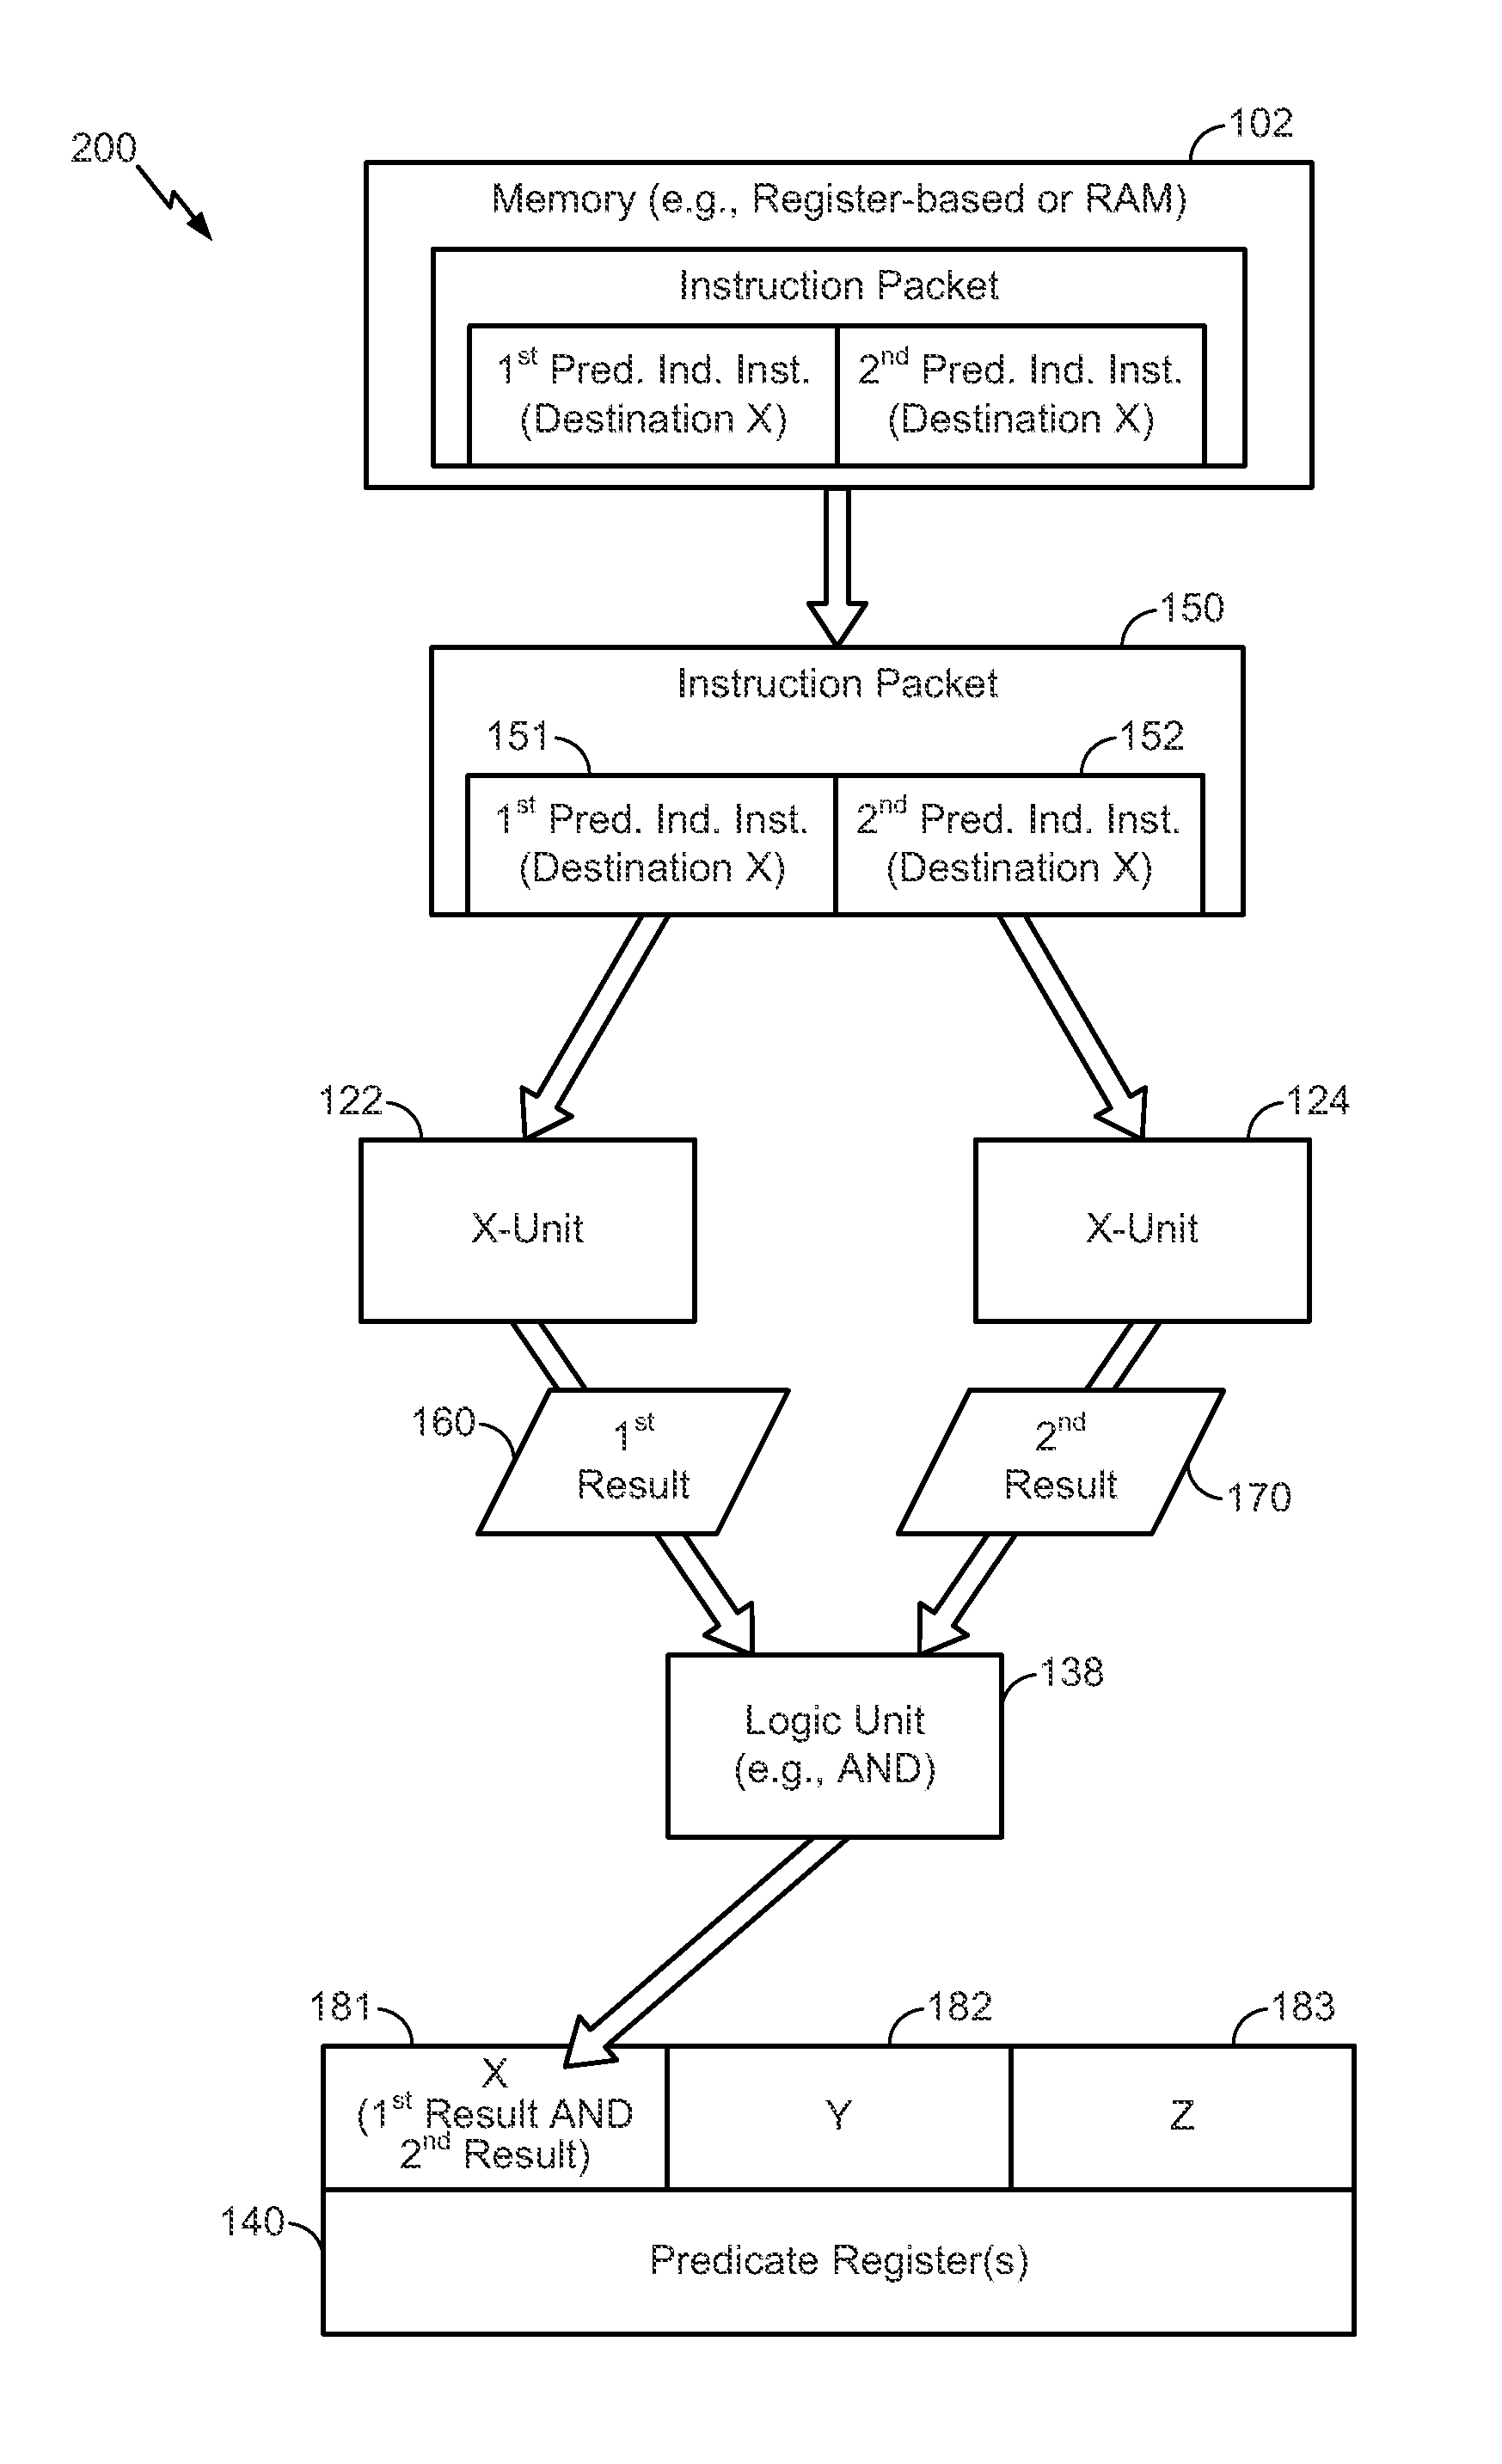 Executing instruction packet with multiple instructions with same destination by performing logical operation on results of instructions and storing the result to the destination